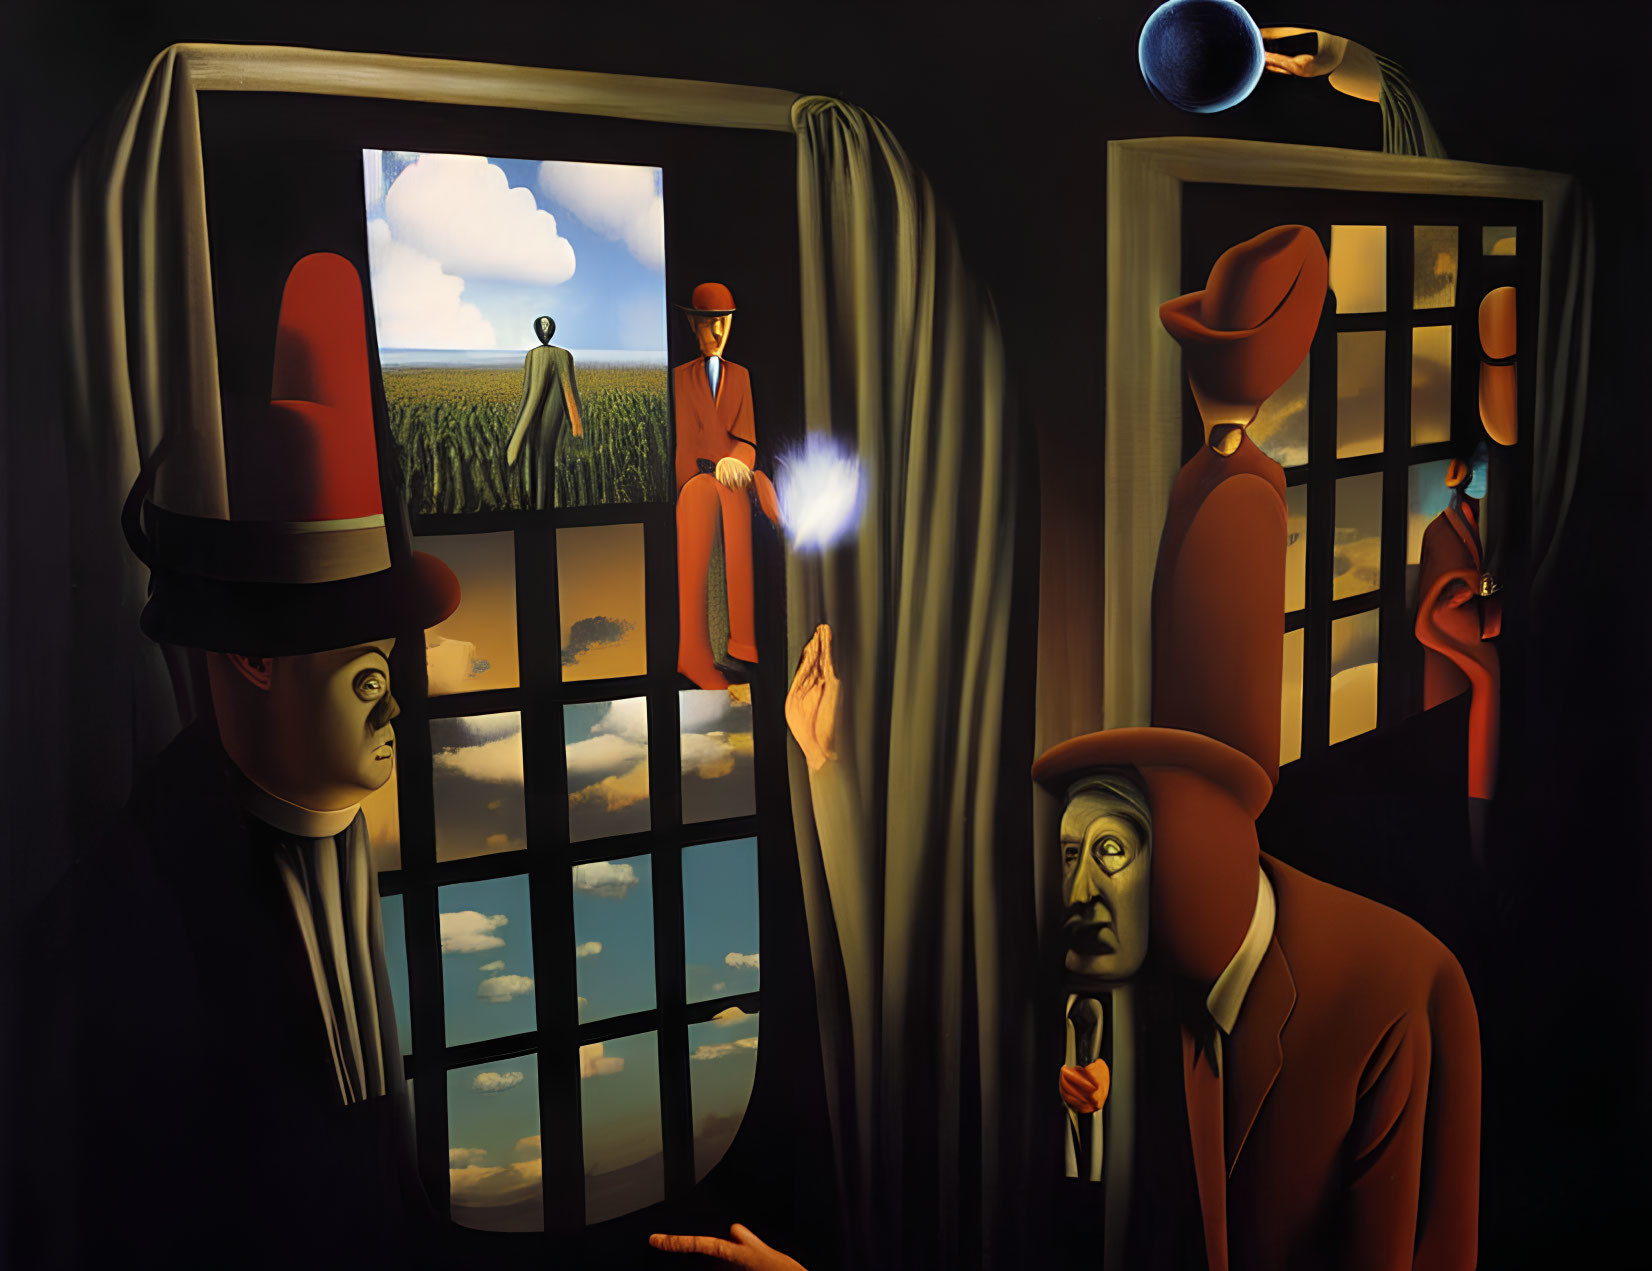 Surrealist painting with men in bowler hats and dream-like scenes